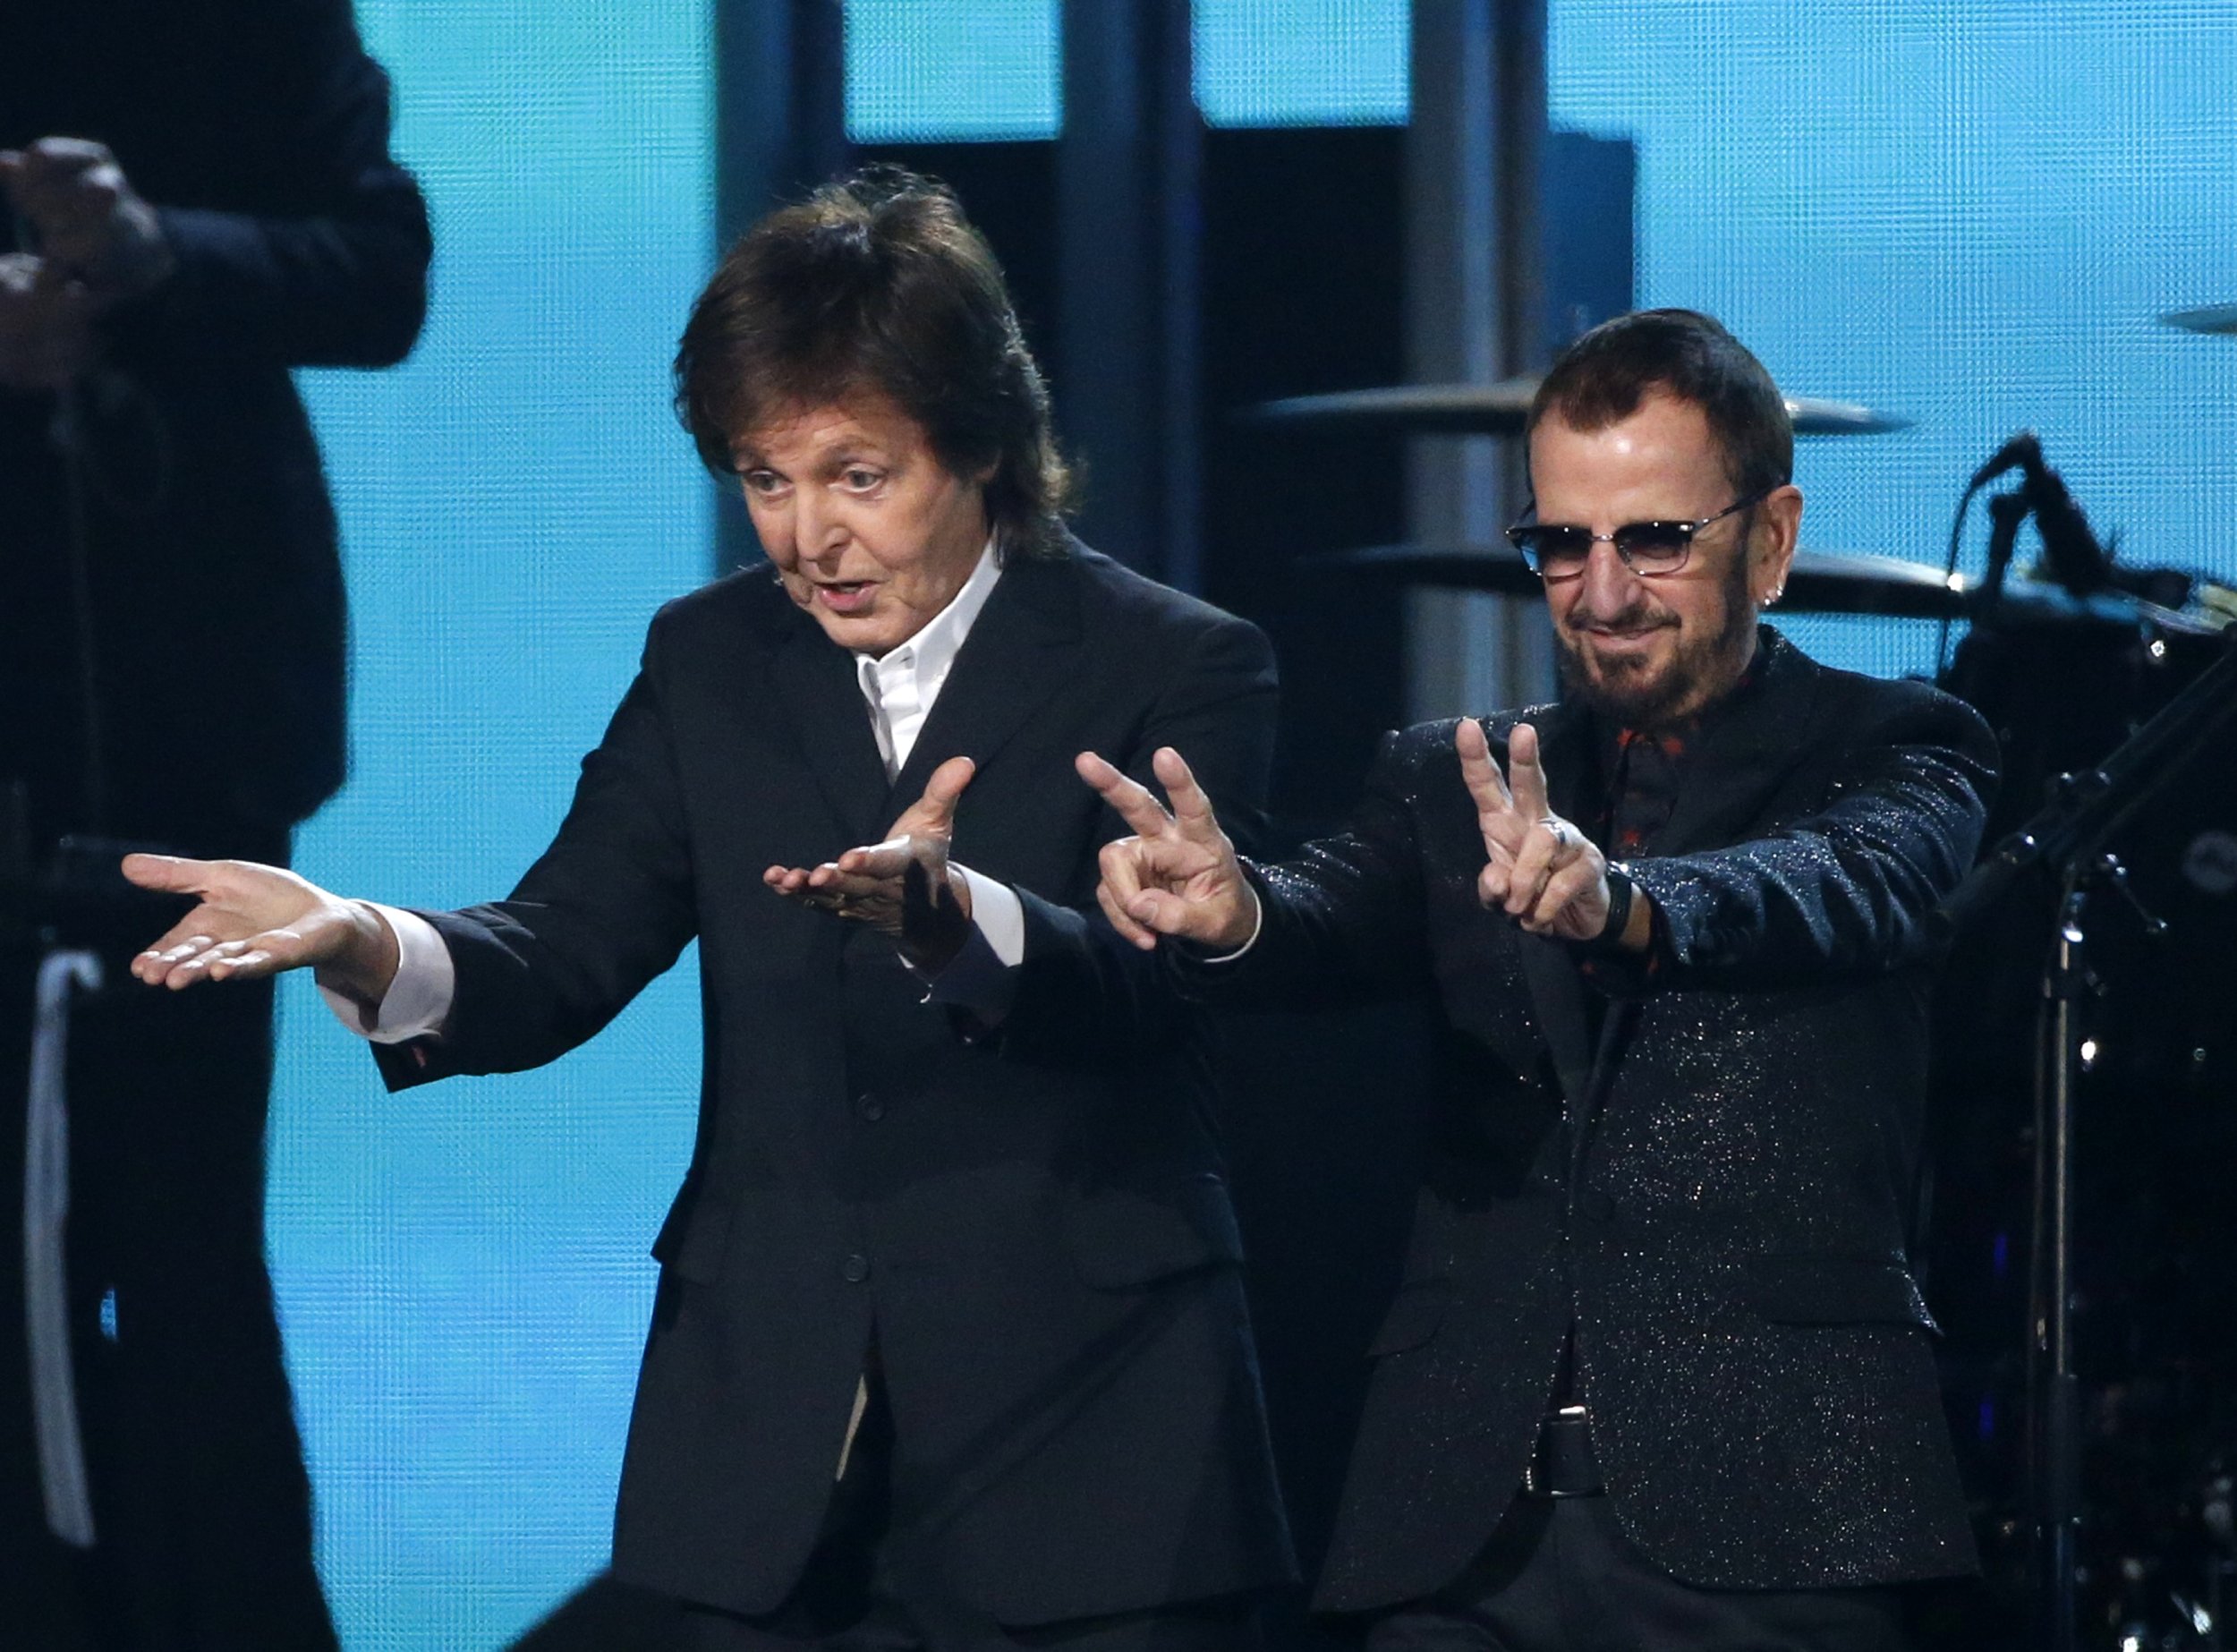 Paul McCartney And Ringo Starr Perform Together At Grammys 2014 IBTimes